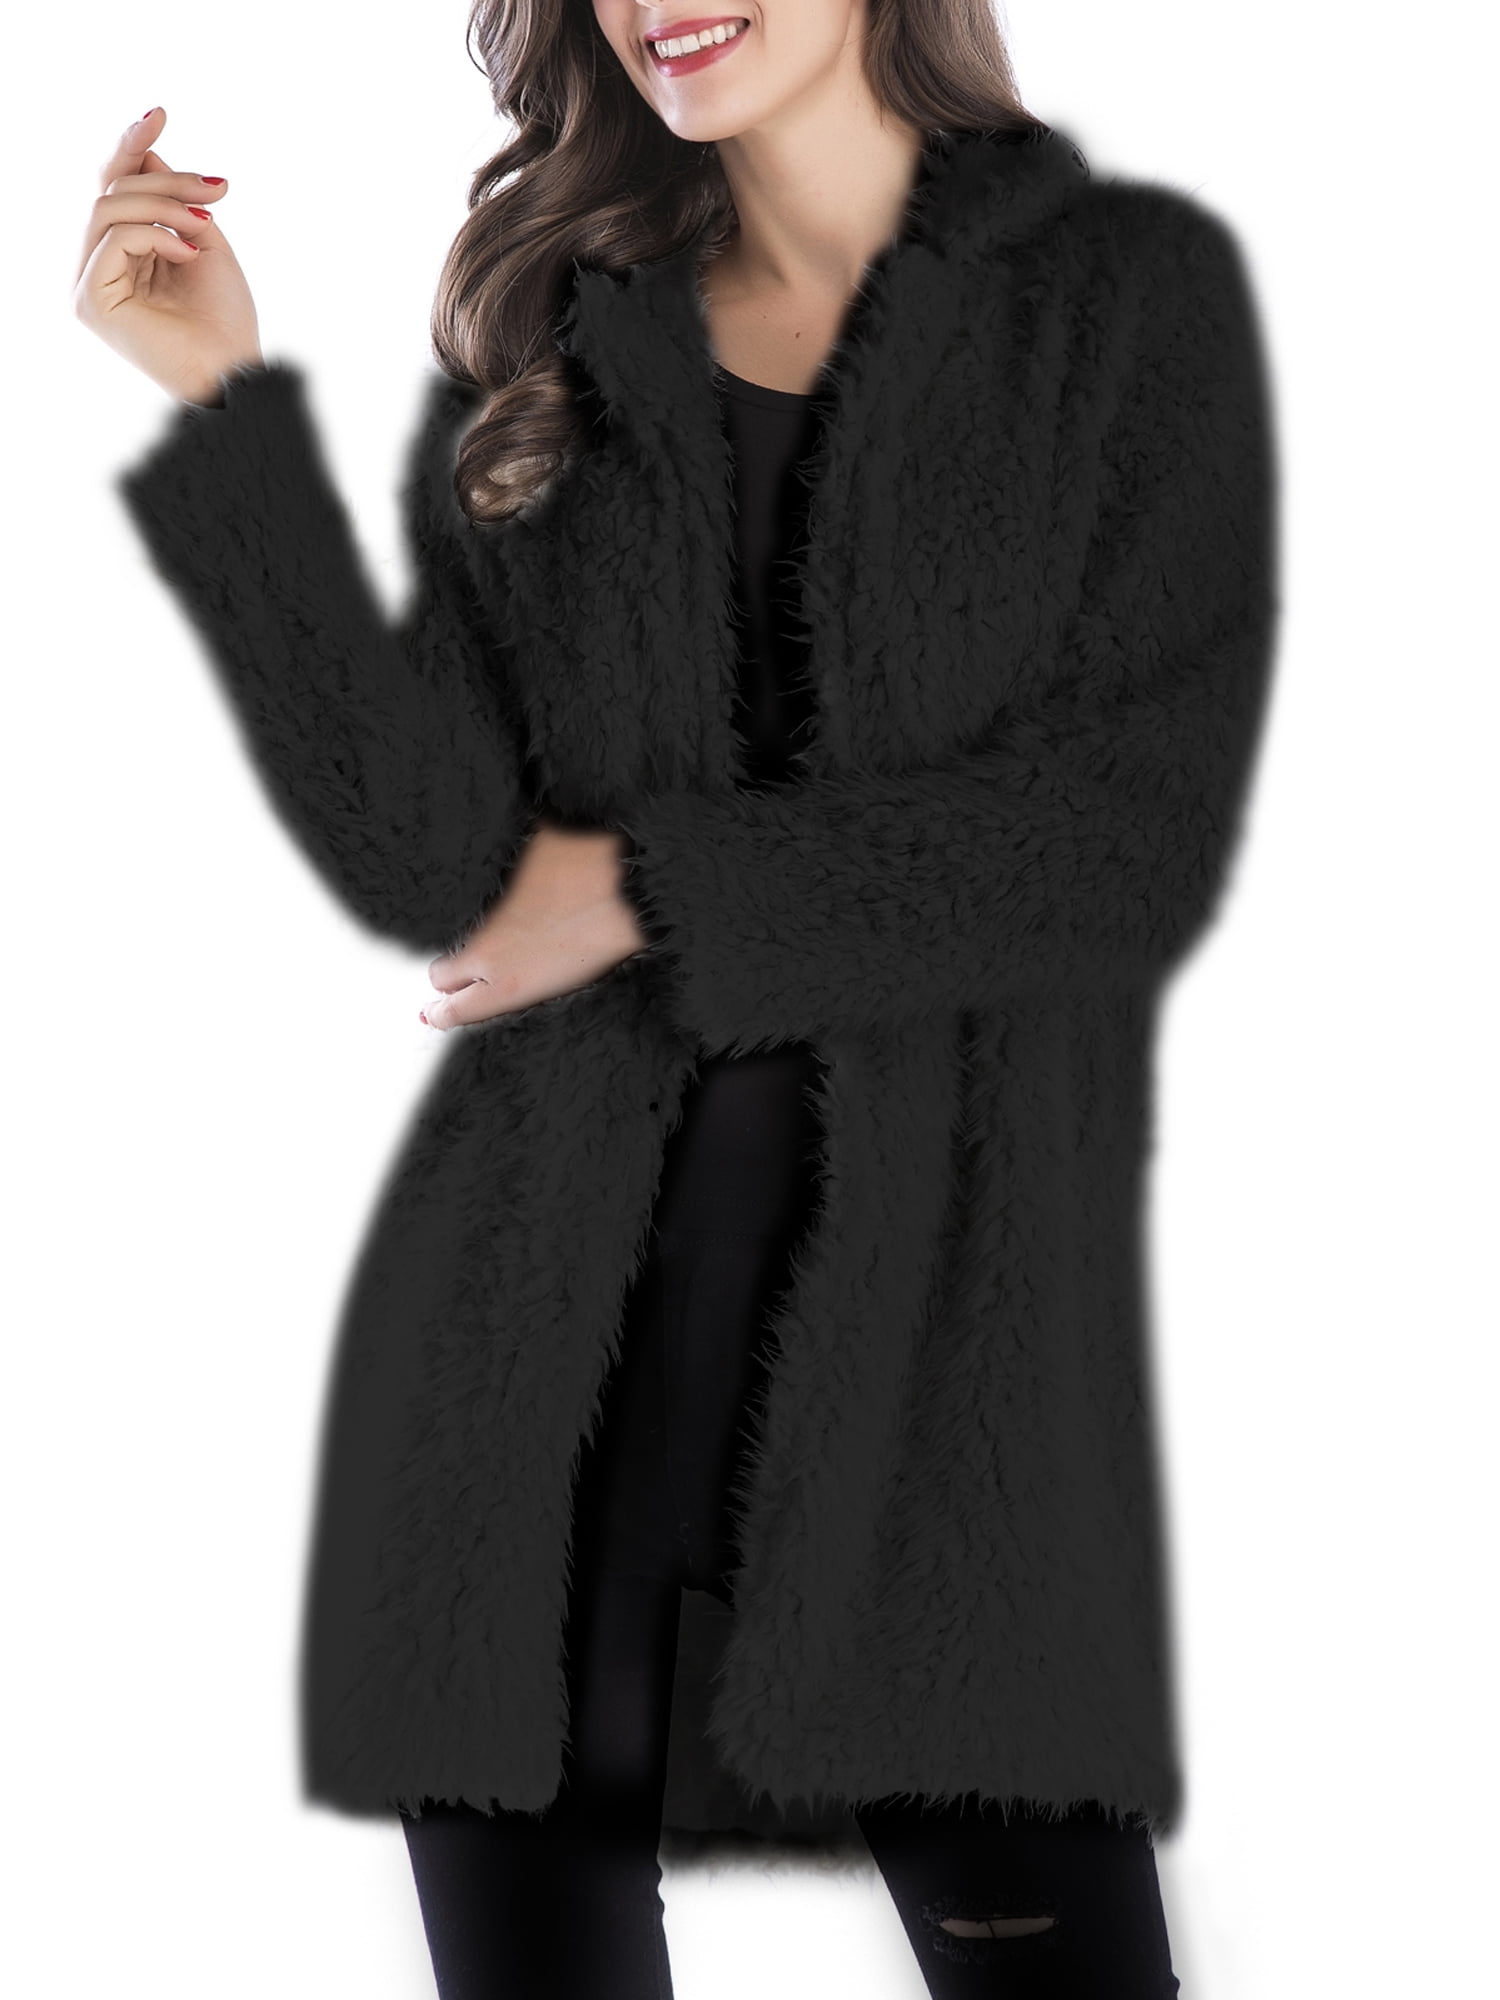 HIRIRI Fuzzy Cardigans for Women Casual Open Front Hooded Color Block Loose Draped Winter Outwear Coat with Pockets 